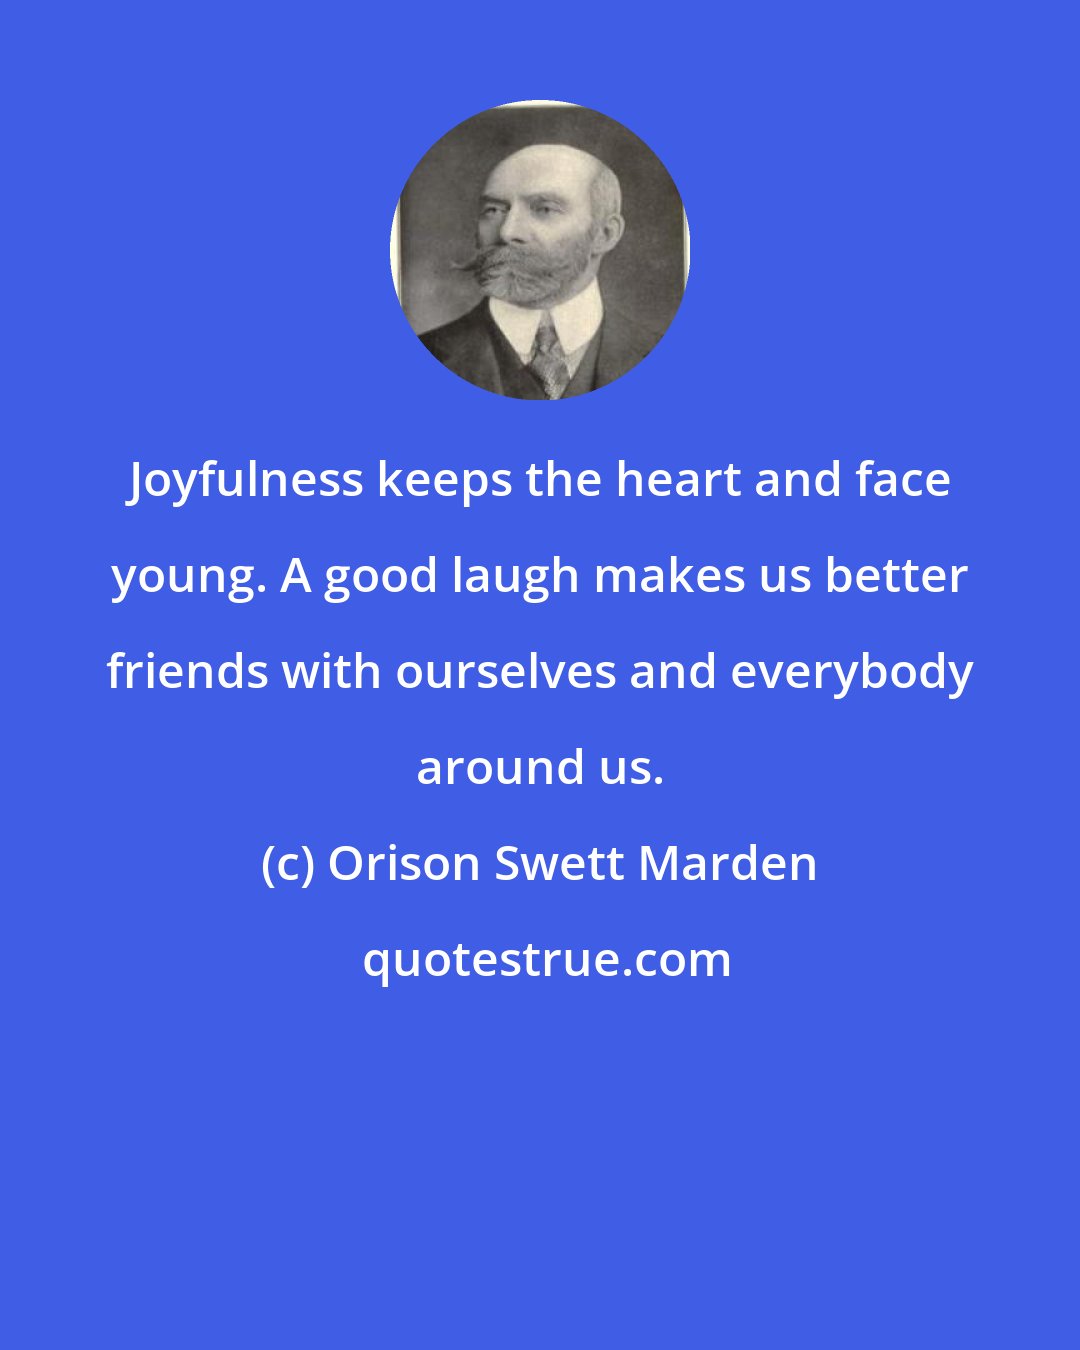 Orison Swett Marden: Joyfulness keeps the heart and face young. A good laugh makes us better friends with ourselves and everybody around us.